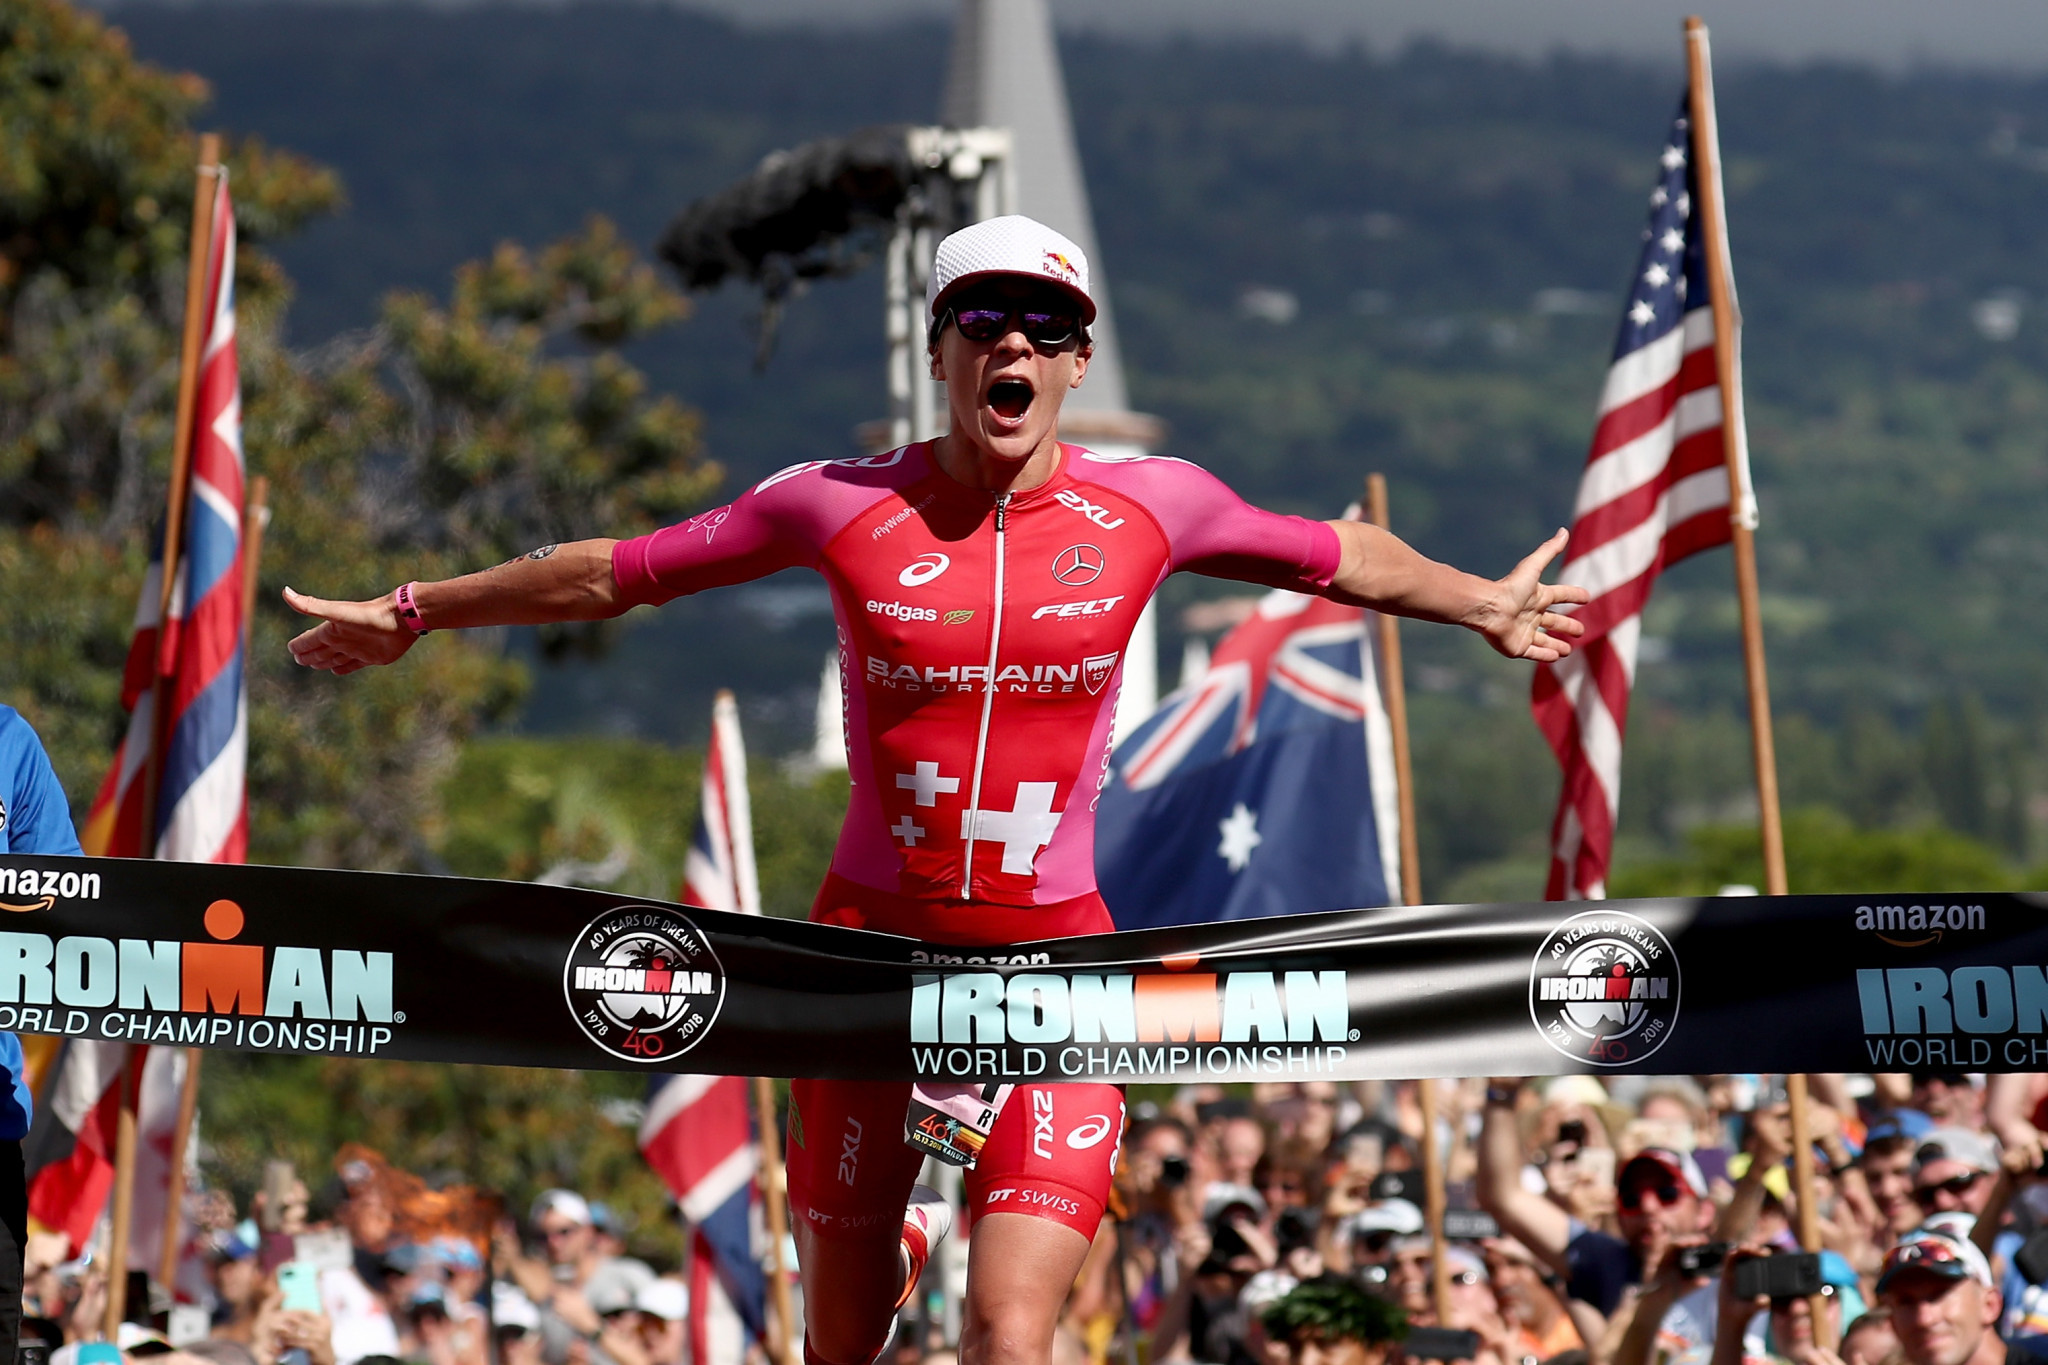 Daniela Ryf of Switzerland celebrates winning the Ironman World Championship, setting a course record despite being stung by a jellyfish just before the event began ©Getty Images